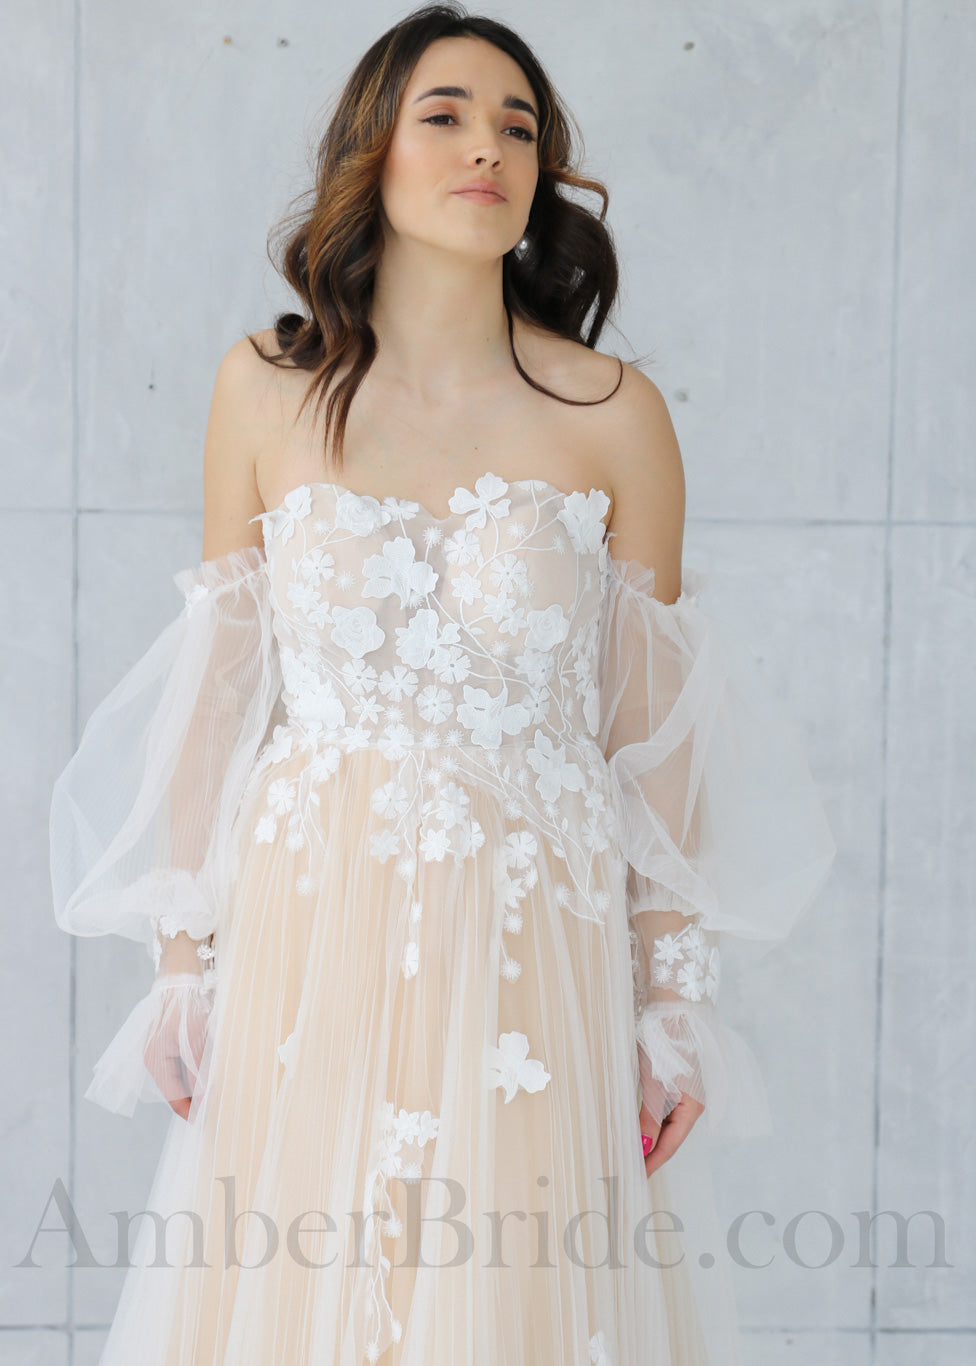 Rustic A-Line Wedding Dress with Flower Appliques and Long Puffy Sleeves